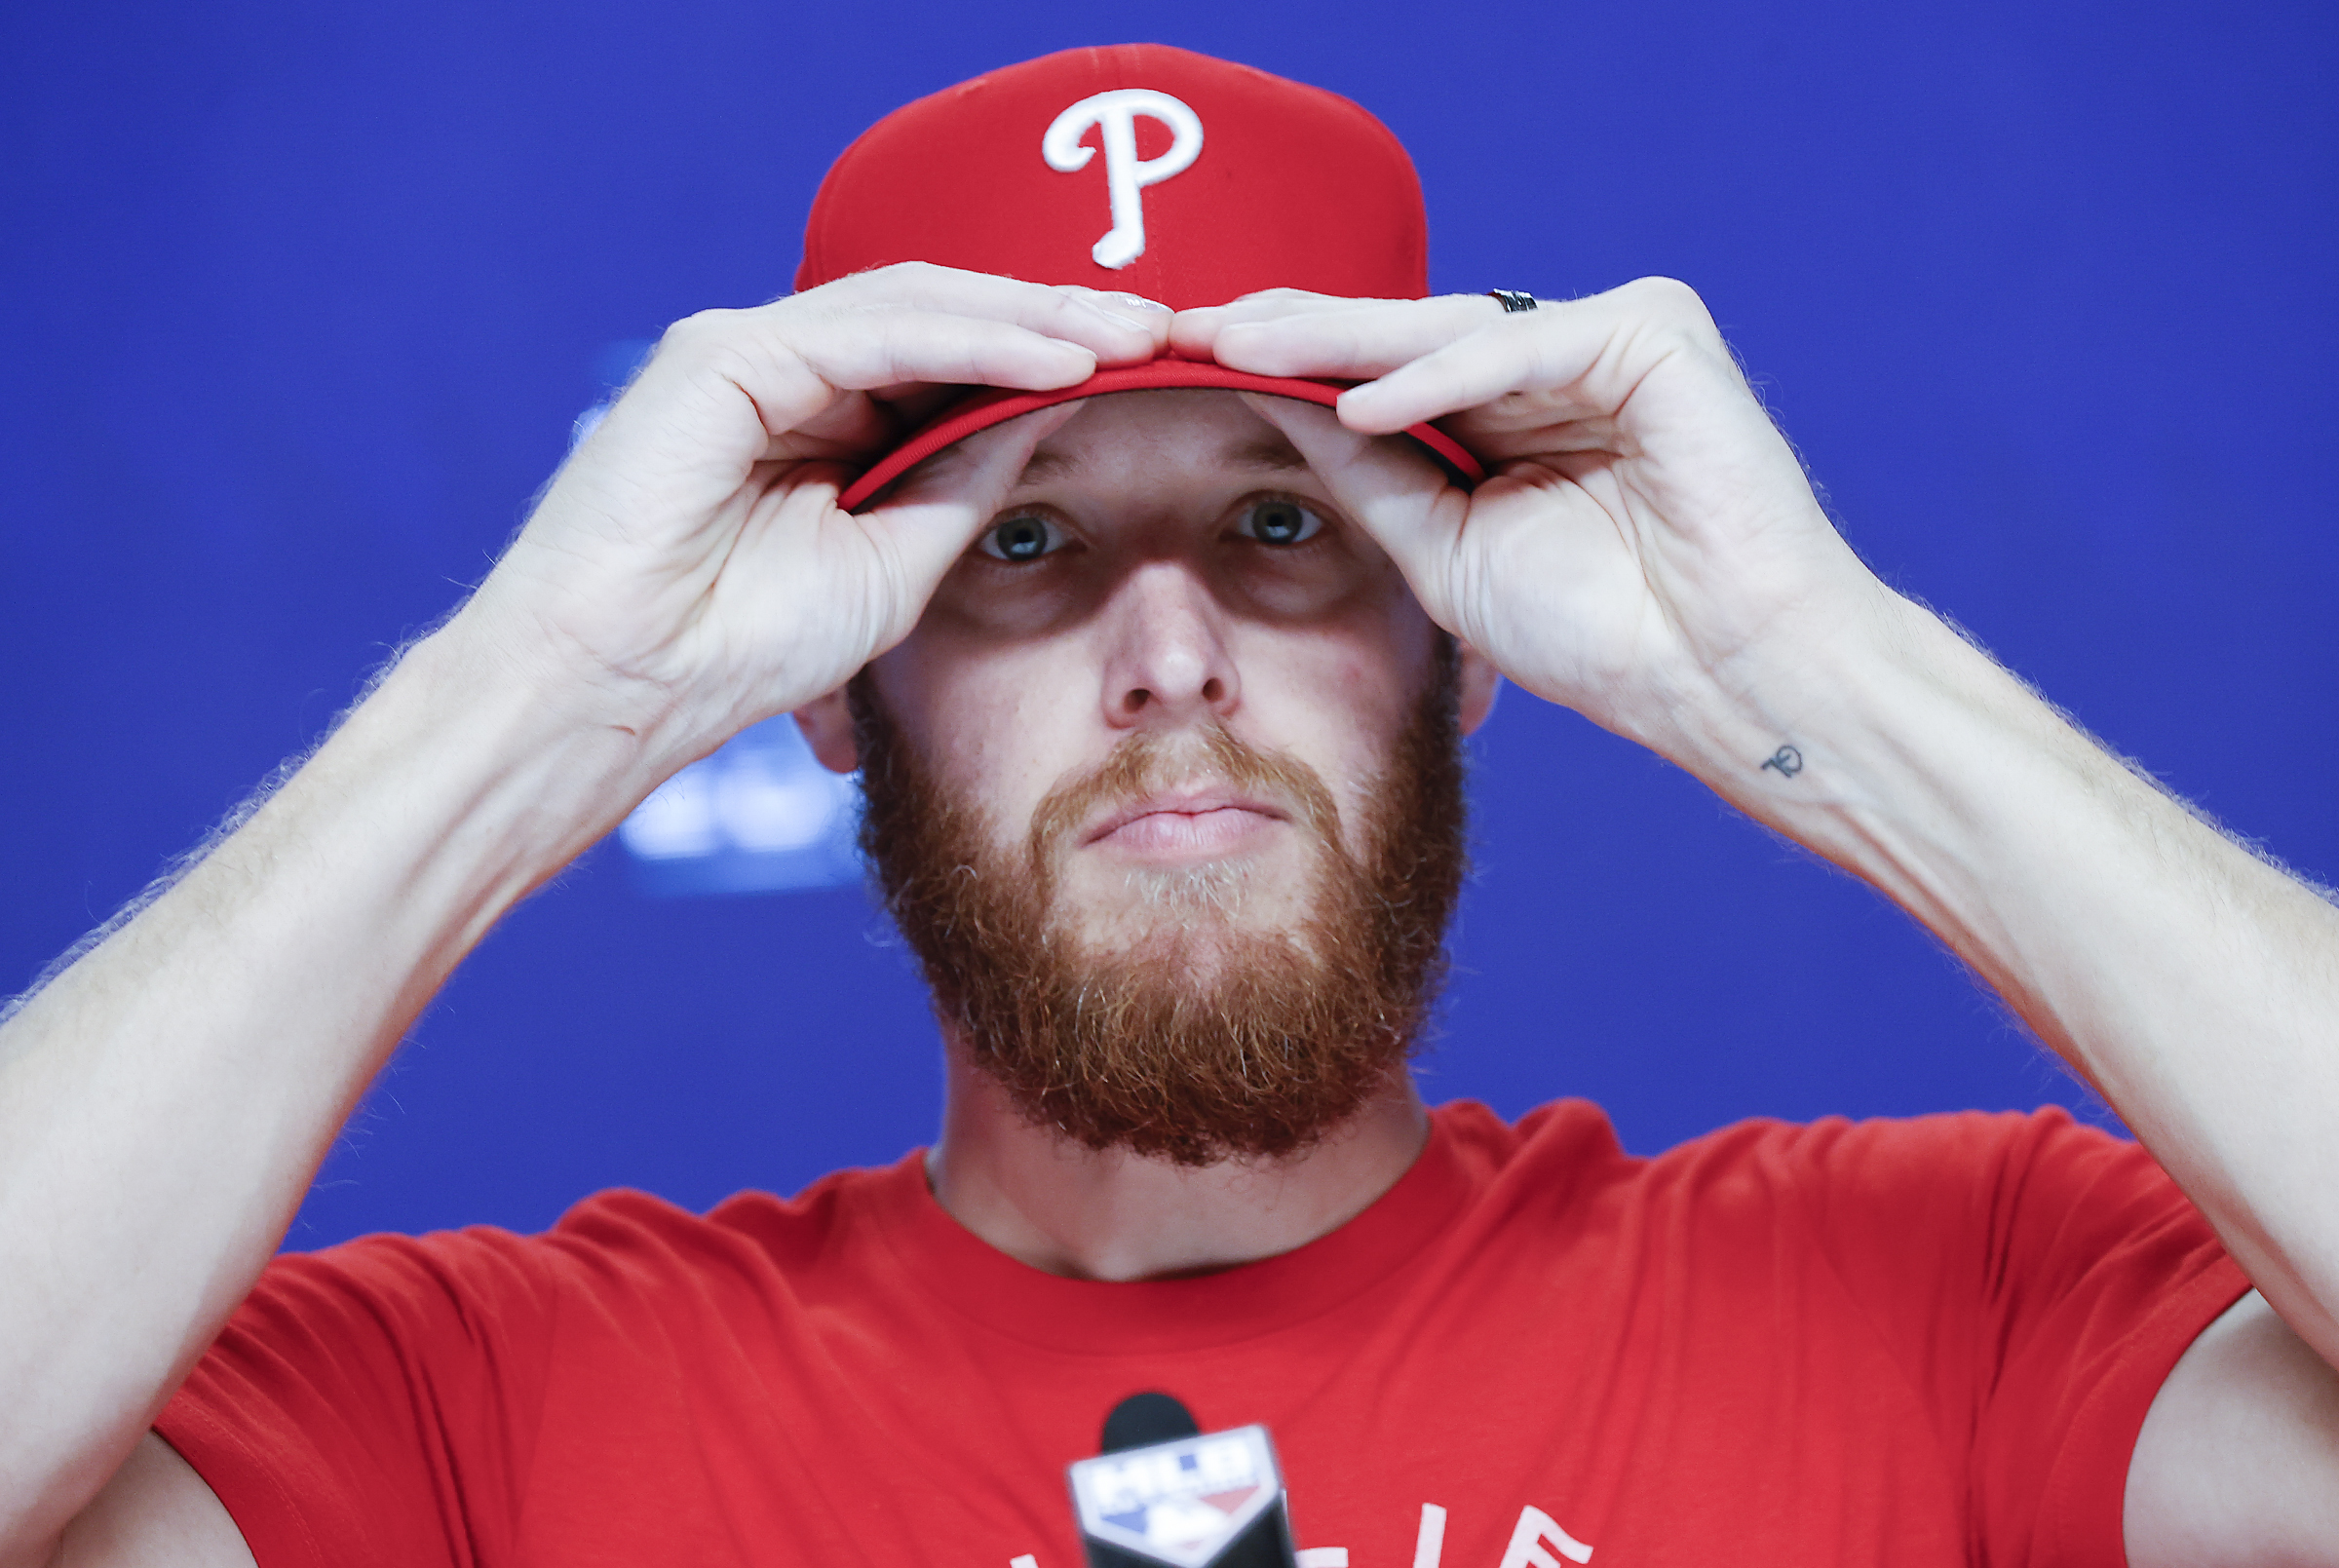 MLB playoffs: Phillies' Zack Wheeler ready to face the Braves, the team he  grew up rooting for